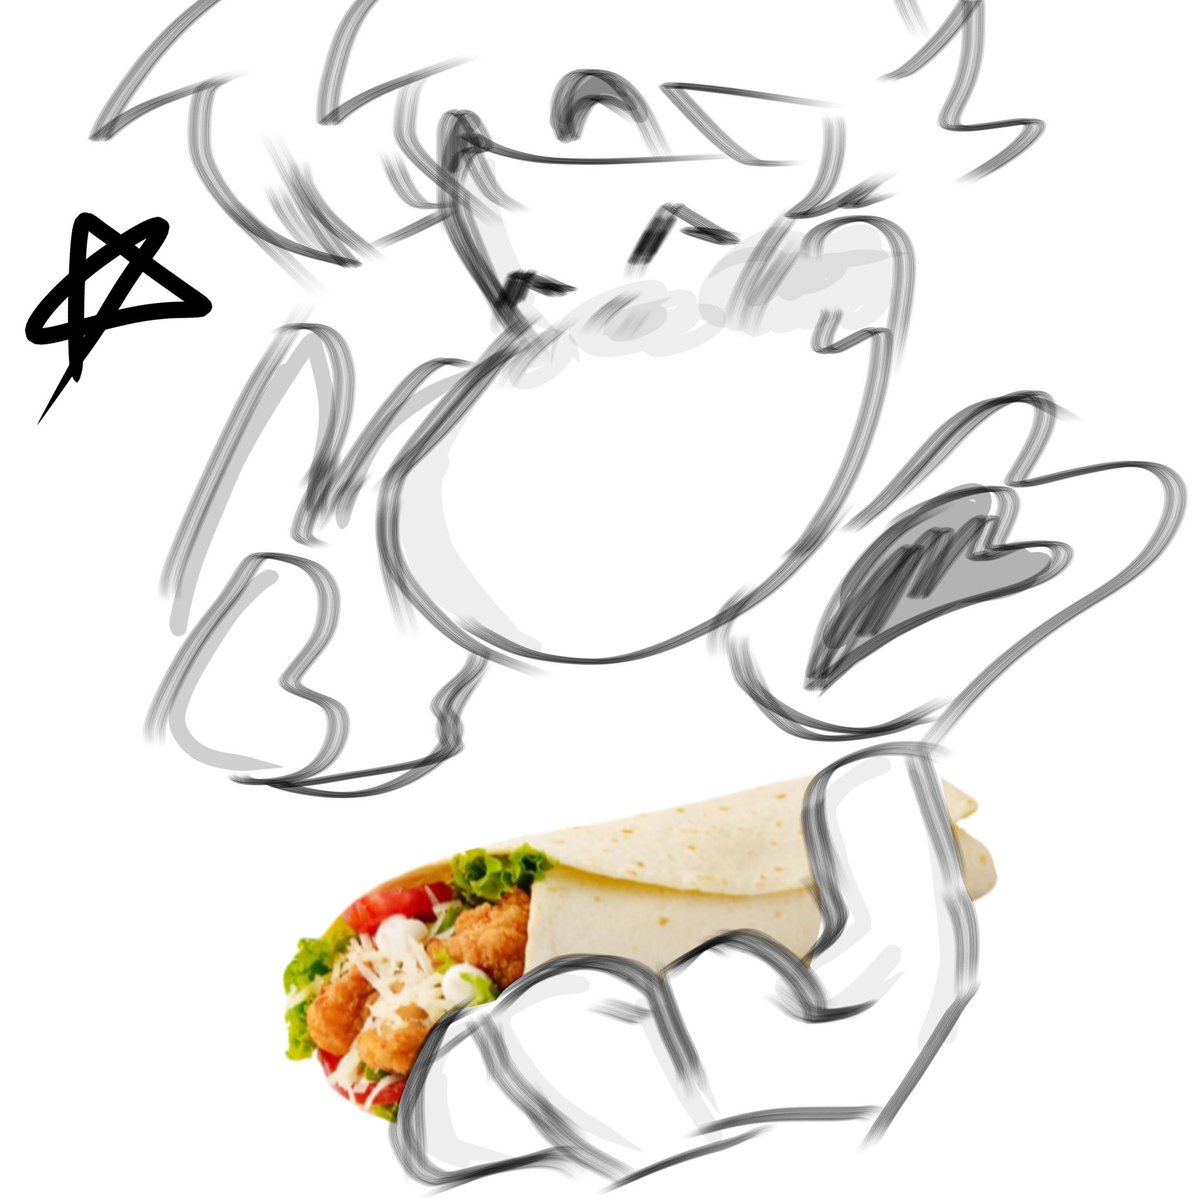 @abom_hasLanded Rayman will give you a burrito to make you feel better :)